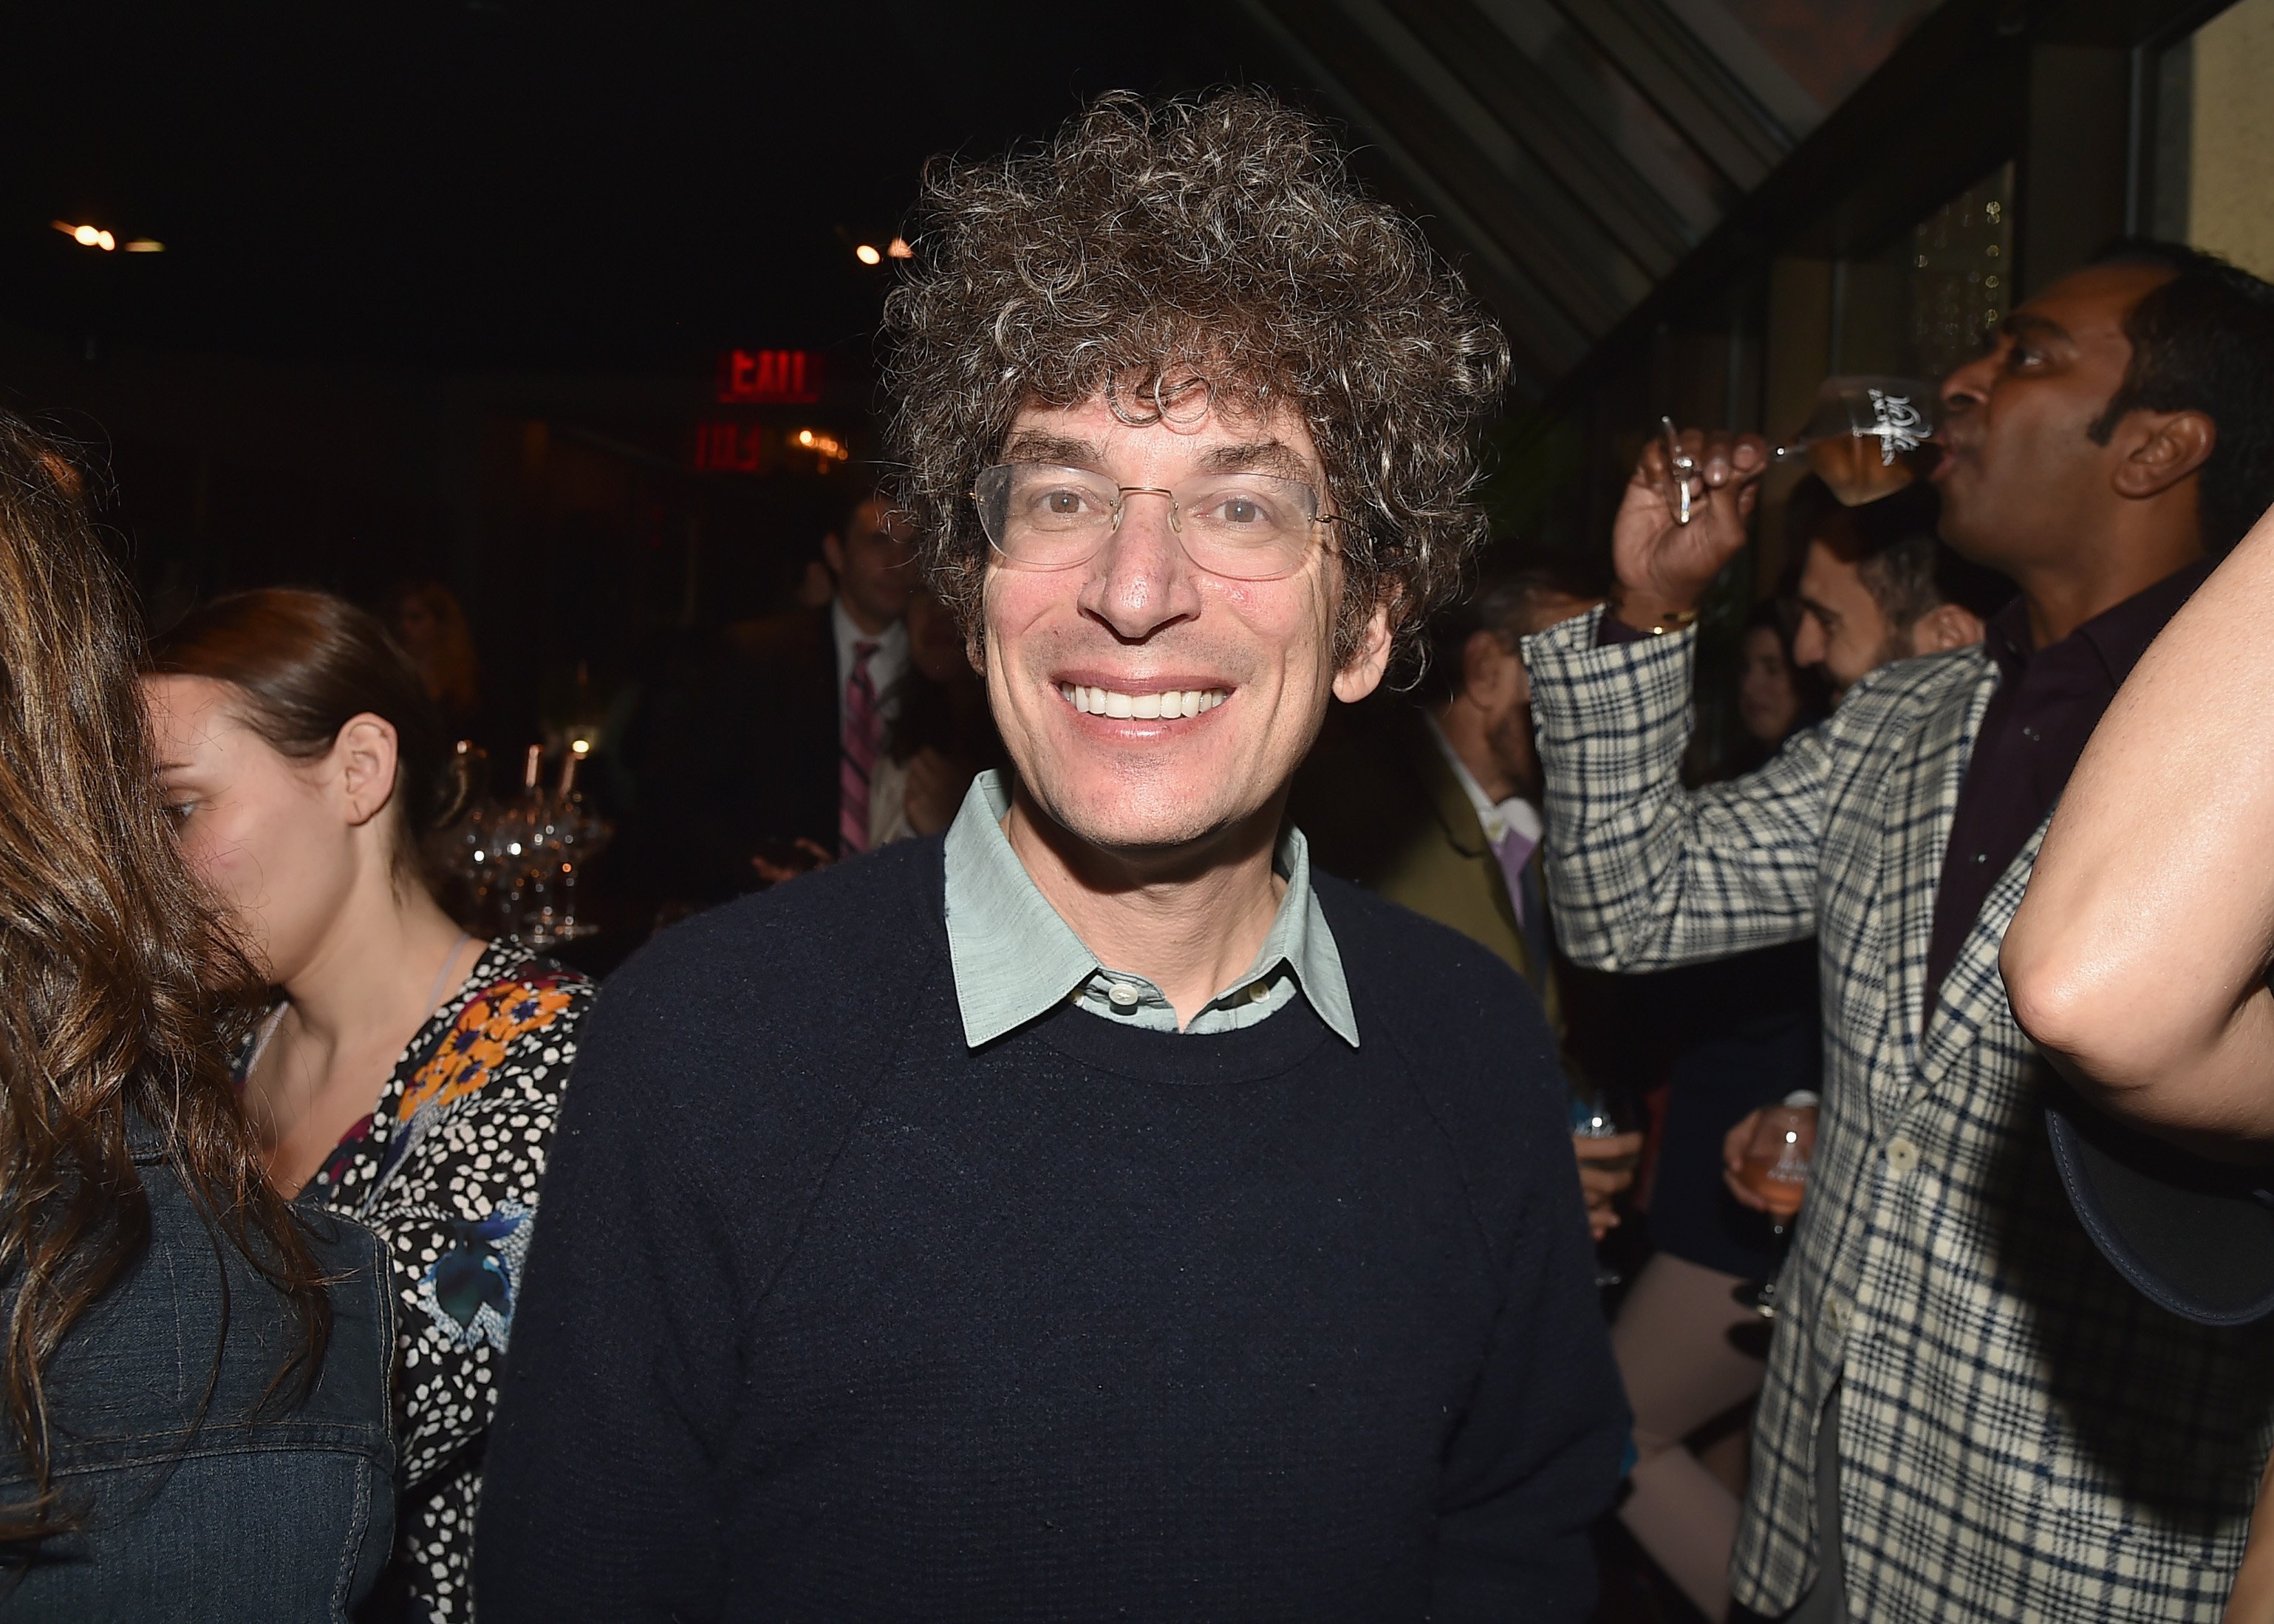 Standup comedy club co-owner James Altucher